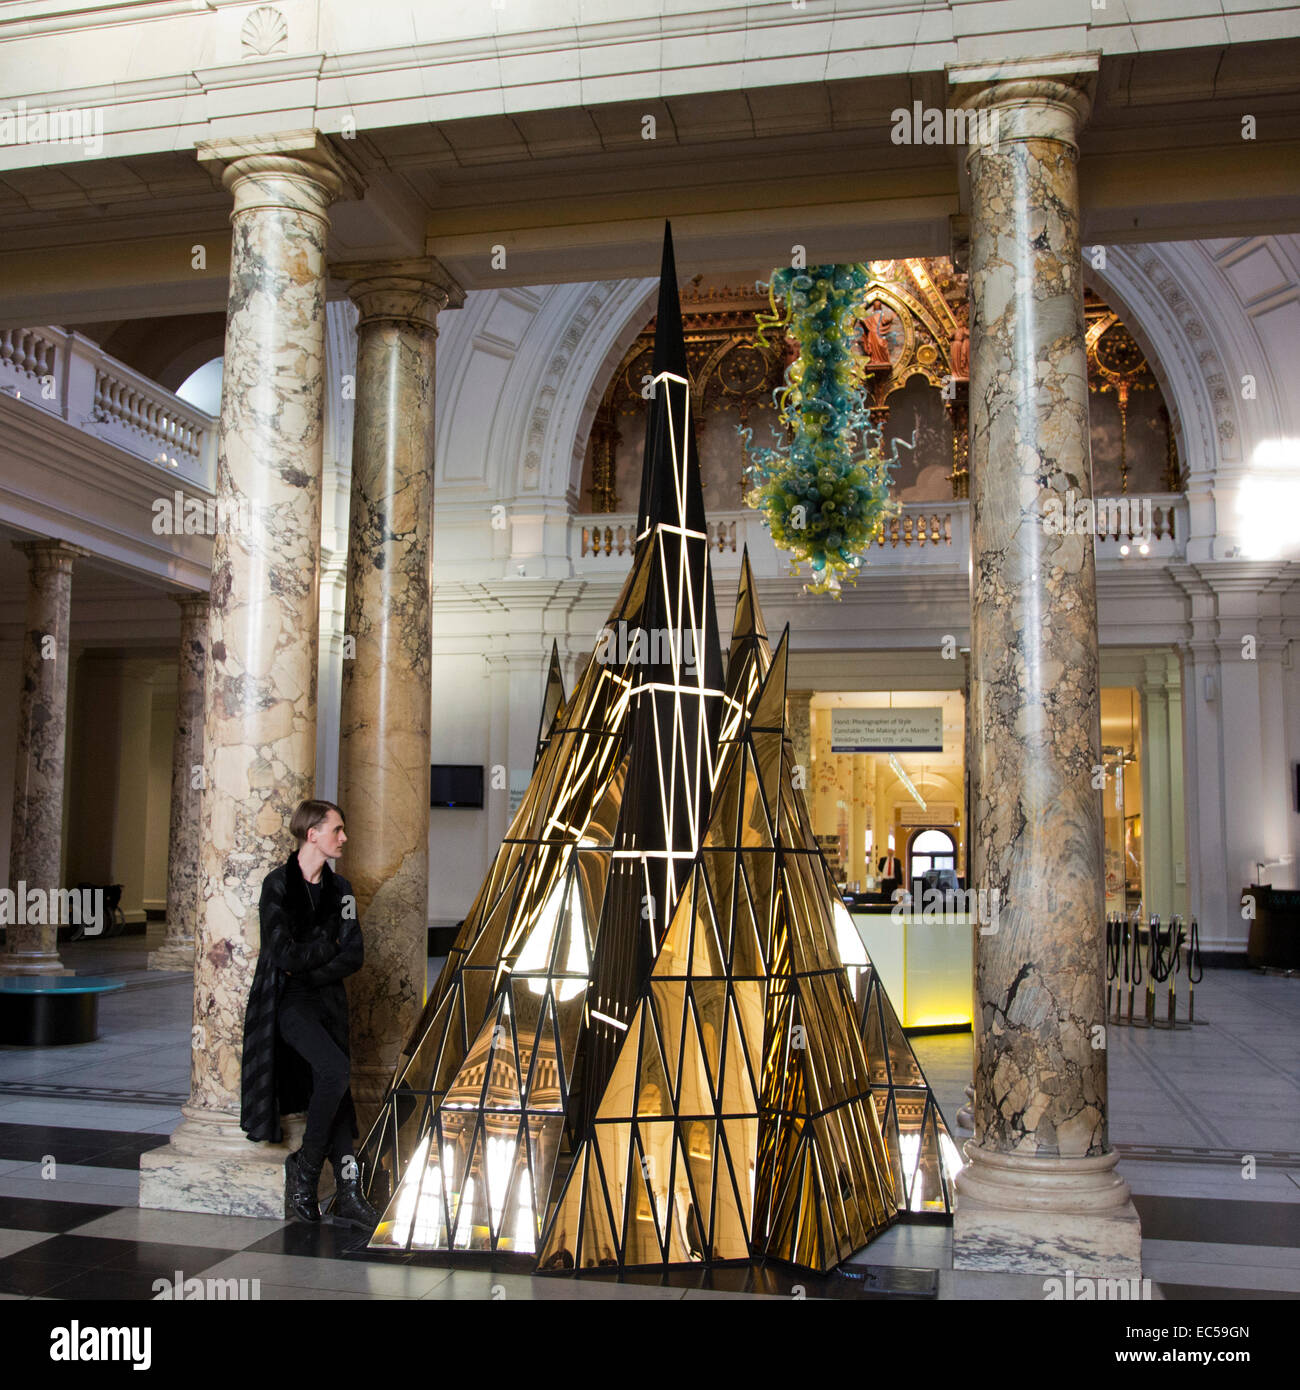 London, UK. 9 December 2014. British fashion designer Gareth Pugh has been commissioned to create a Christmas installation for the Grand Entrance of the V&A. 'Ceremony' stands at over 4m high and mirrors the shape of the traditional Christmas evergreen tree. Nine tiered pyramids are clad in gold which collect around a central beacon of light to represent an abstract nativity. Various materials have been used in the tree's creation including wood, fabric, acrylic and LED lights. Visitors to the V&A Museum can see the Christmas tree from 9 December 2014 to 6 January 2015. Stock Photo